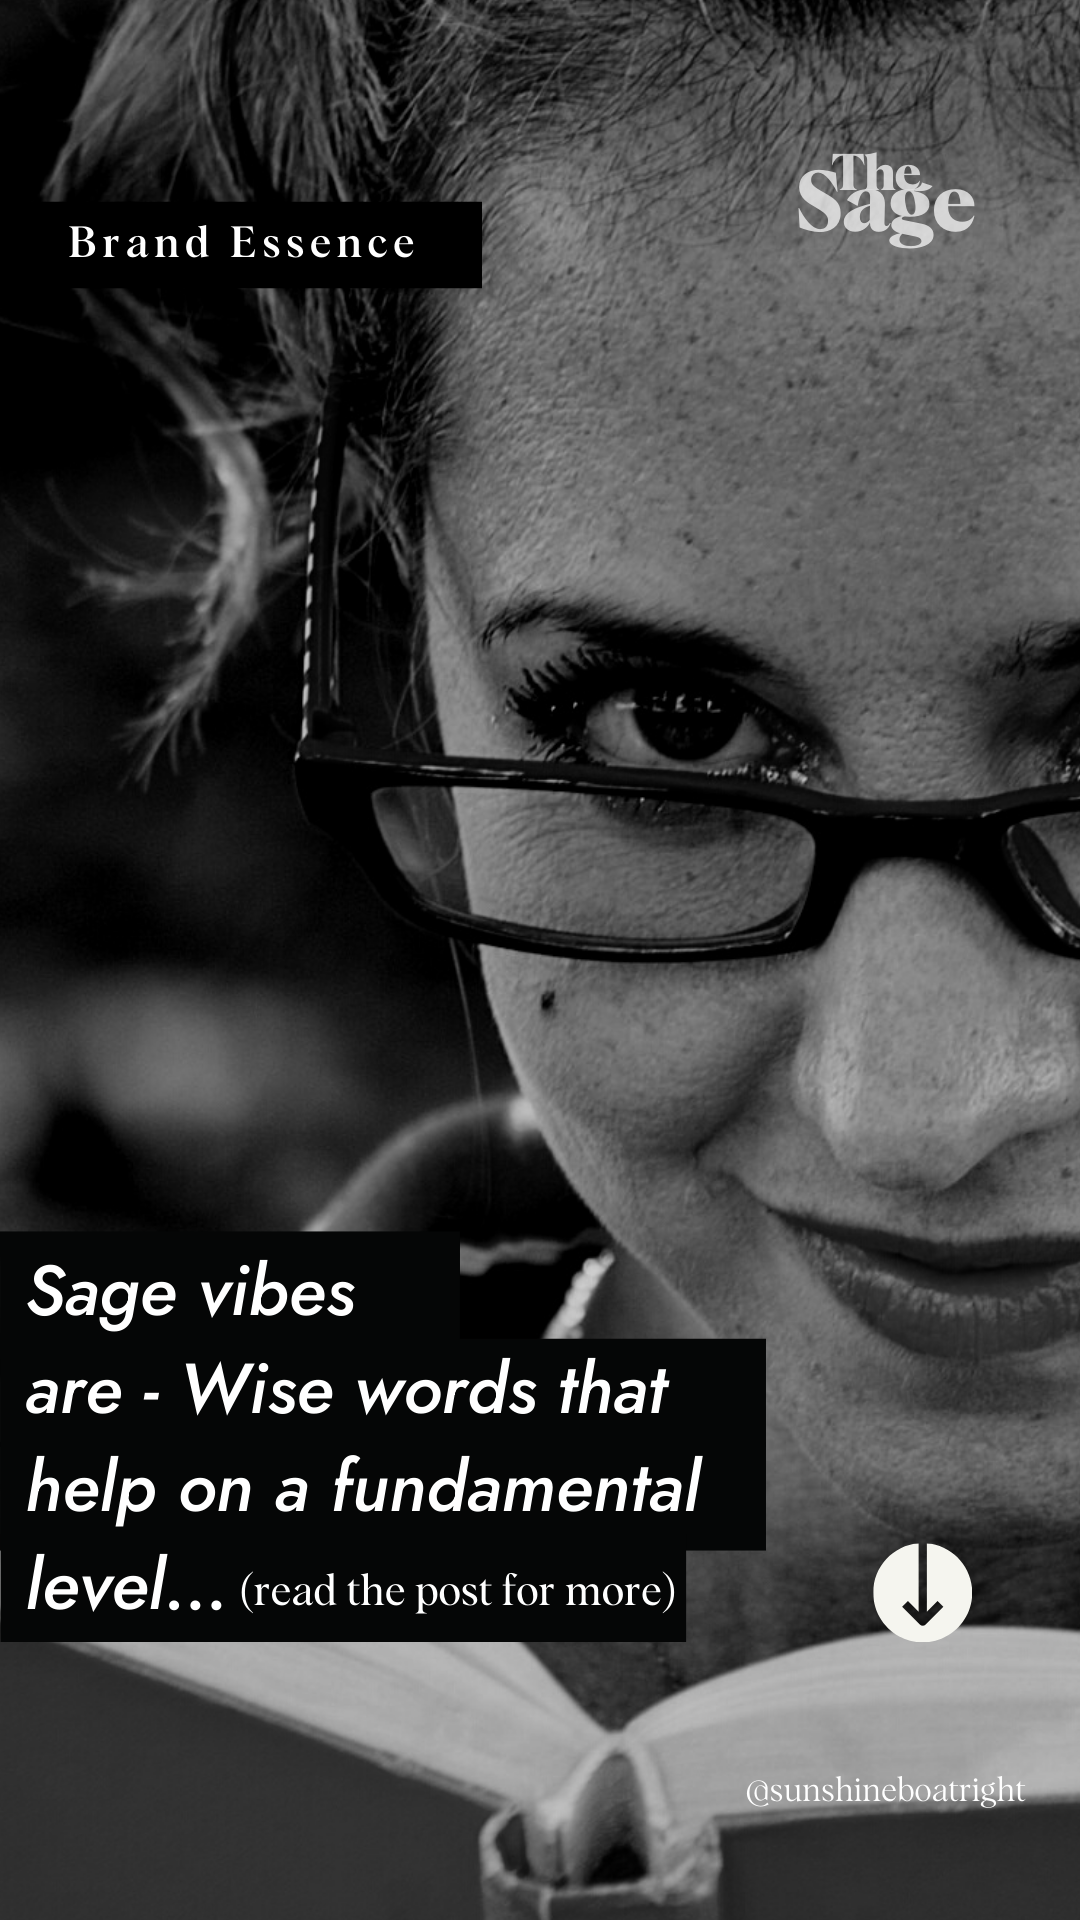 Brand Archetype Essence: Sage vibes are wise words that help on a fundamental level